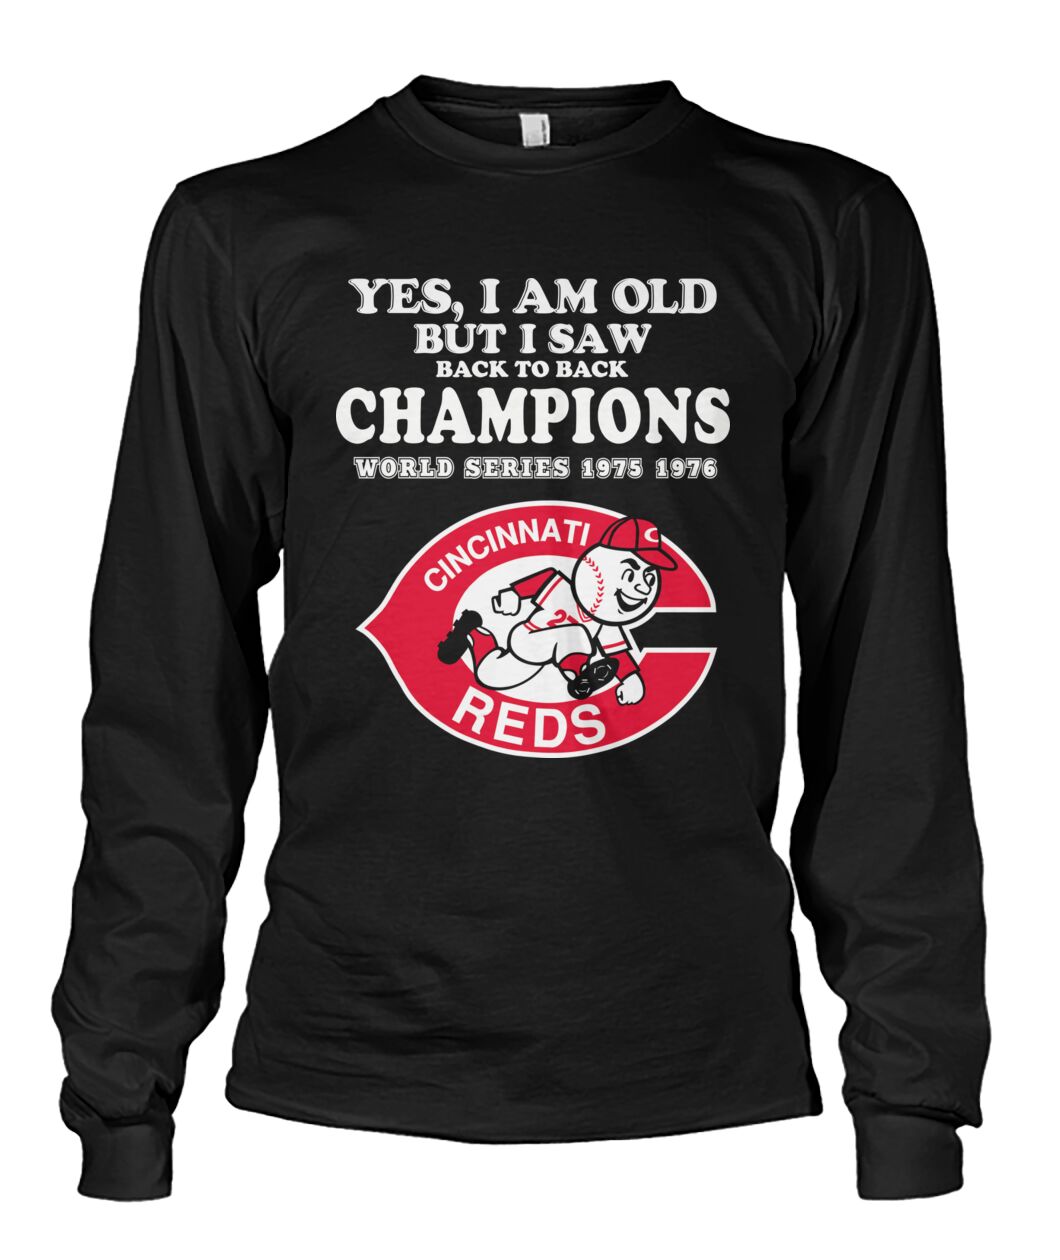 Yes I am old but I saw back to back champions world series 1975 1976 cincinnati reds shirt 13